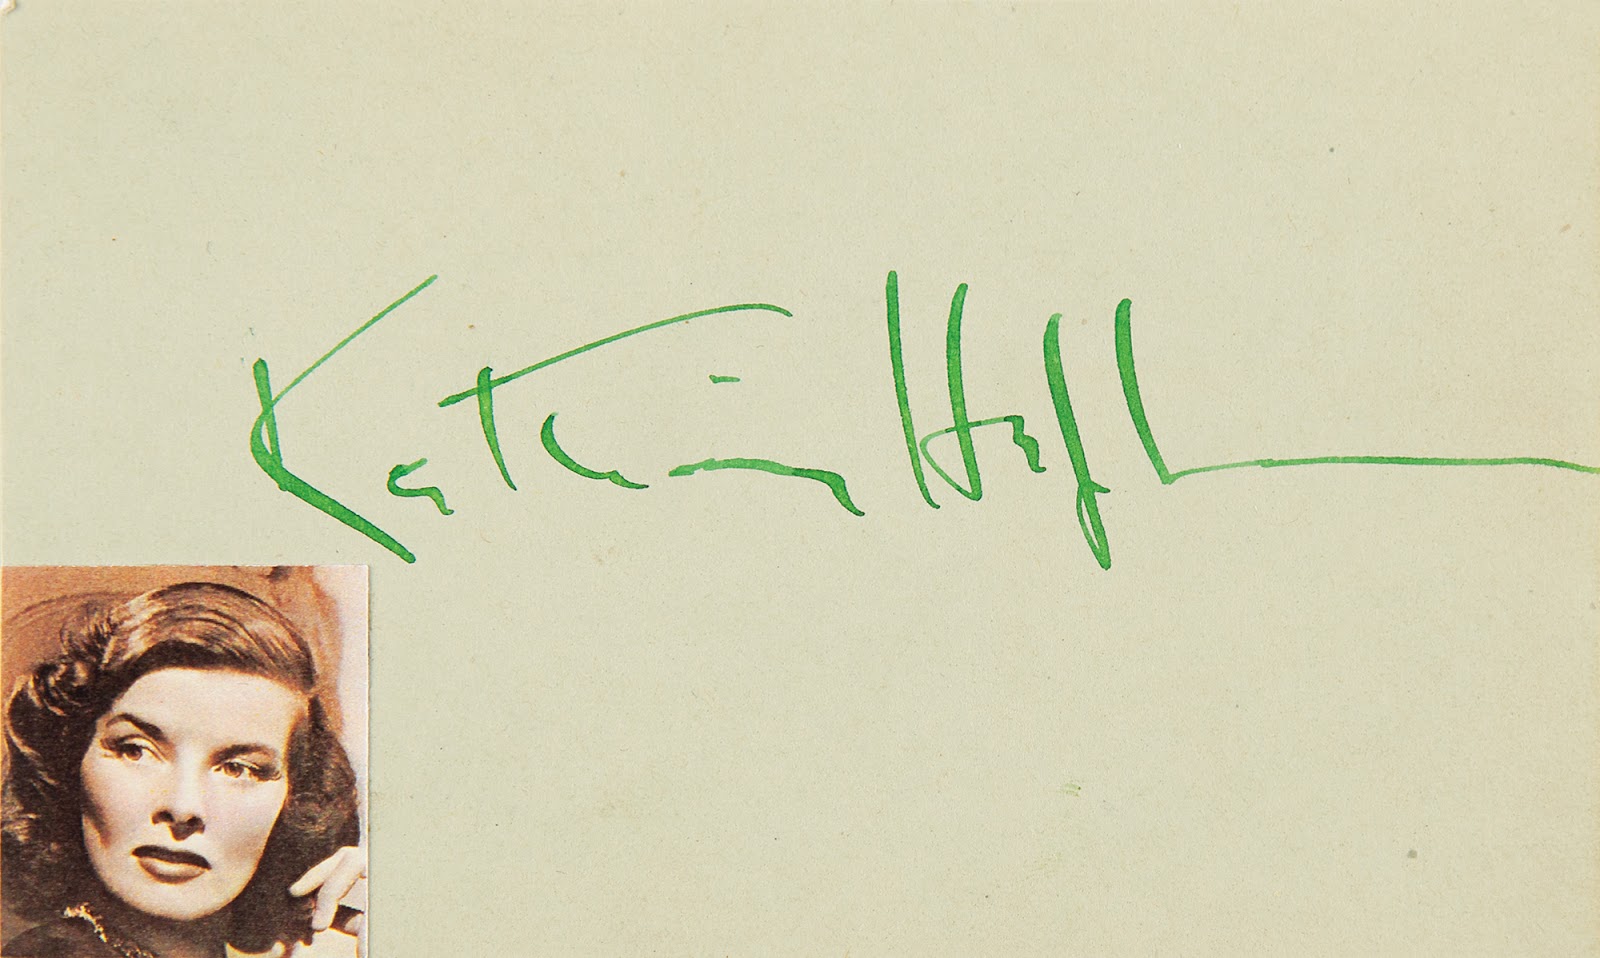 Autograph of golden age Hollywood actress Katharine Hepburn, with her photo affixed to the lower left corner.